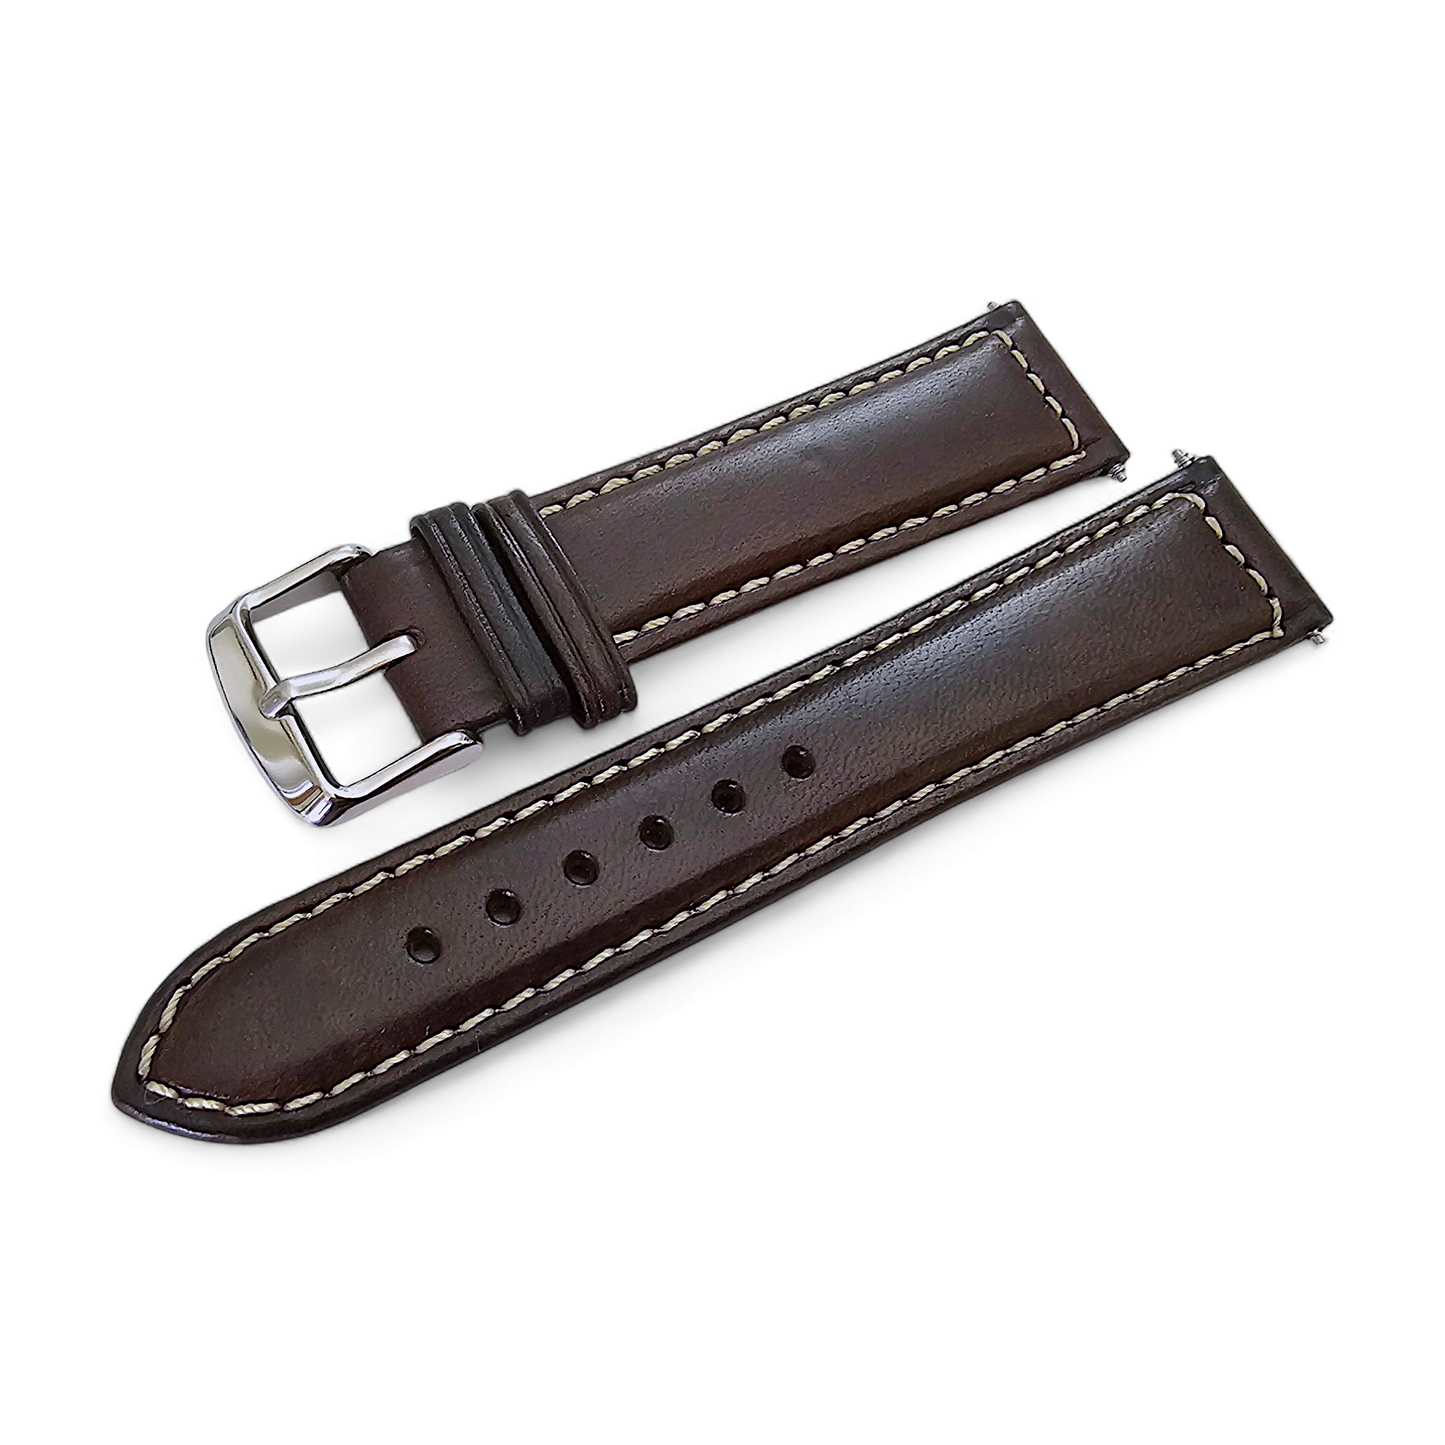 Italian Leather Classic Padded Watch Strap Band 18mm 20mm 22mm Dark Chocolate Brown